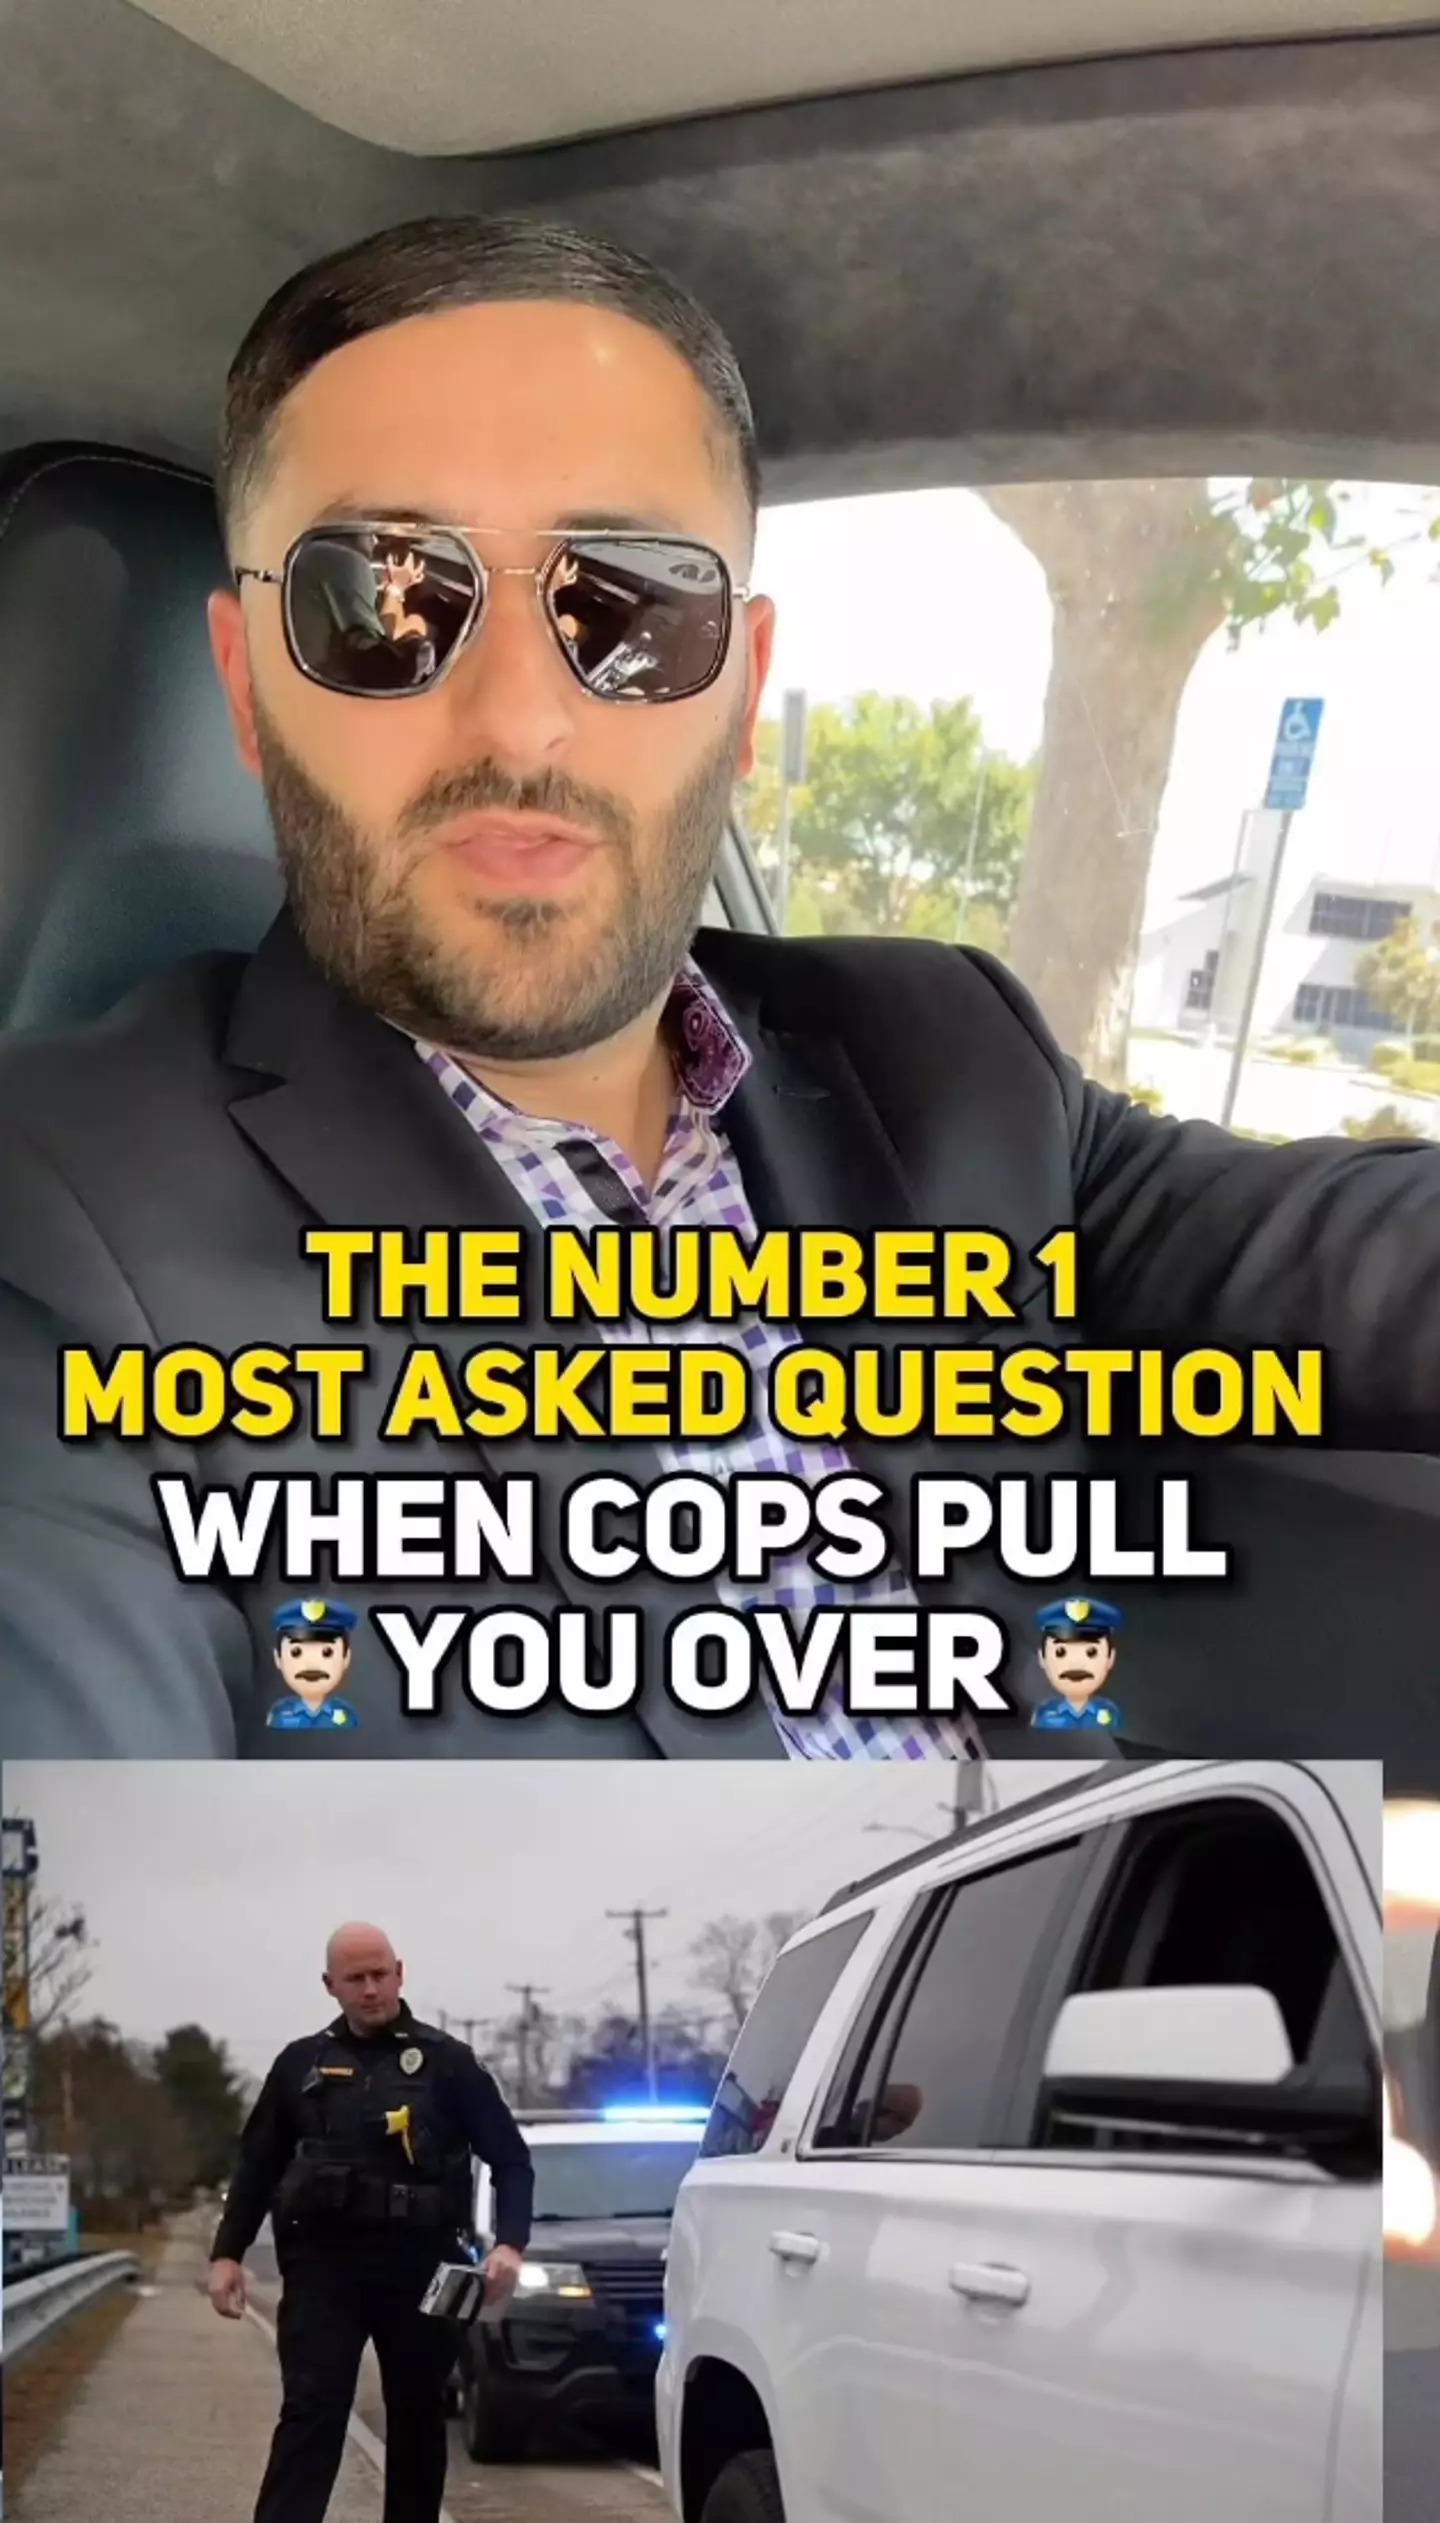 A US lawyer has shared the ‘number one’ thing cops ask when pulling someone over.